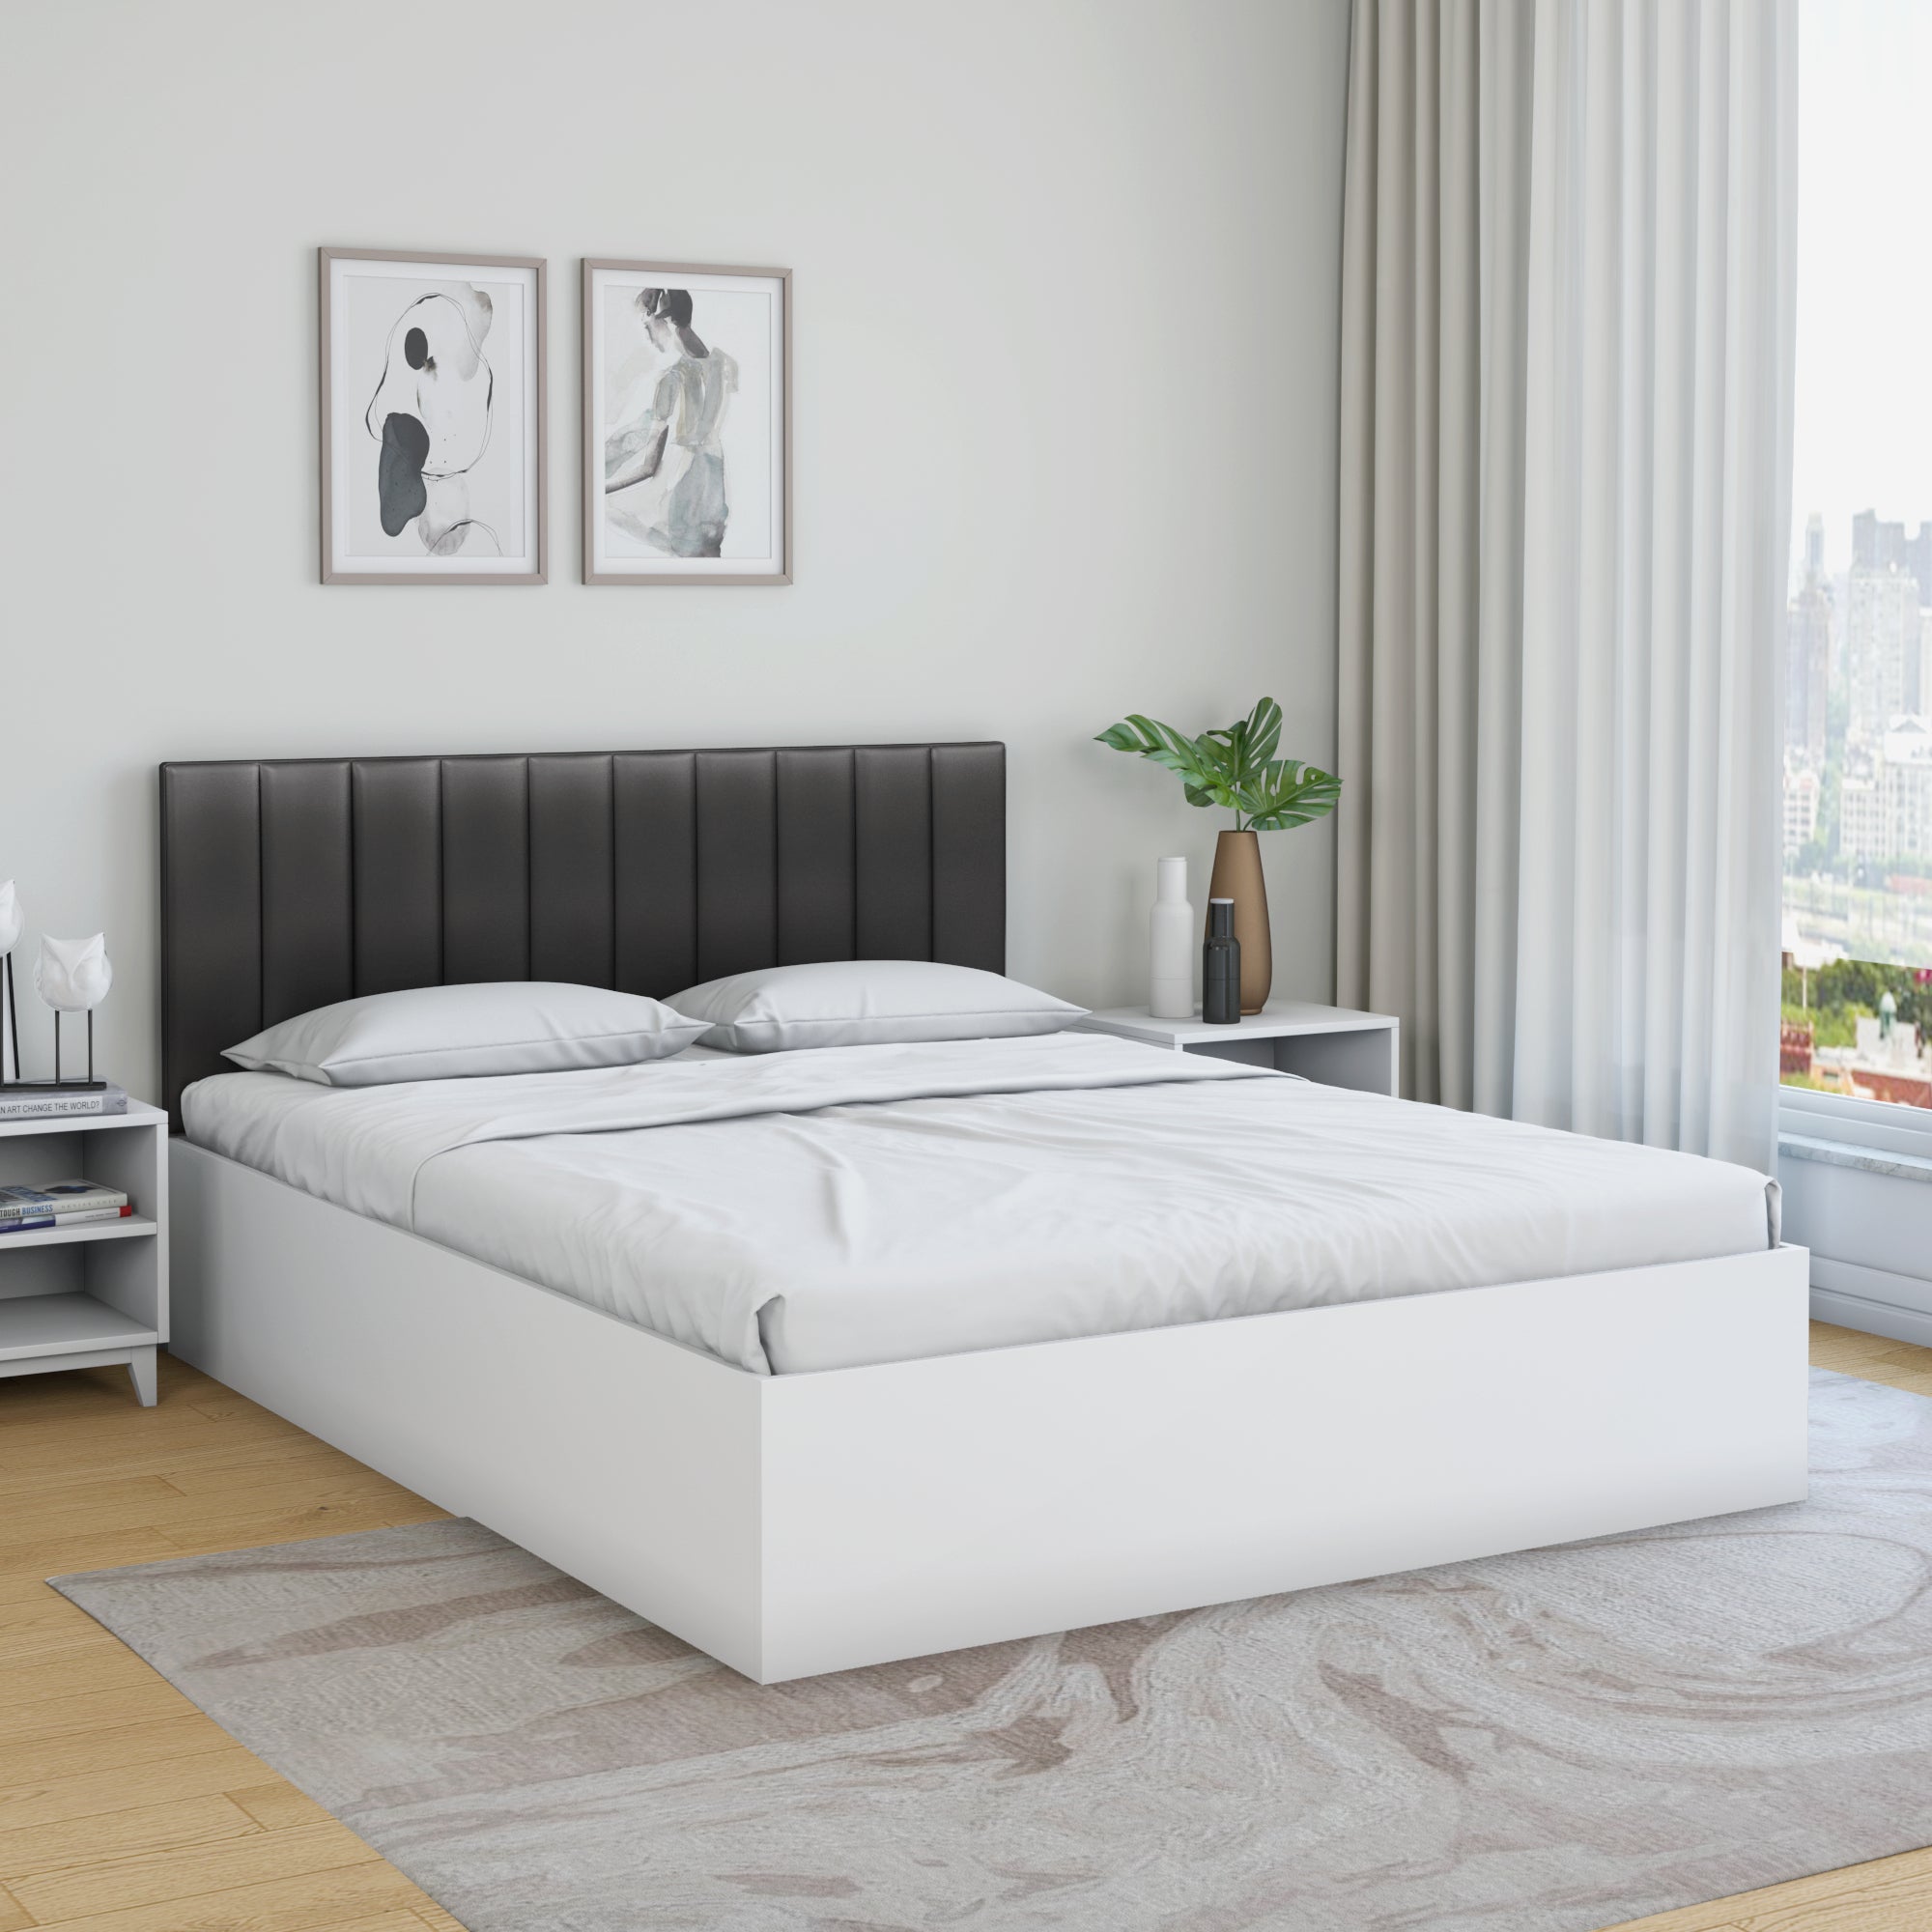 Fusion Queen Bed With Upholstered Headboard & Box Storage (Grey & White)